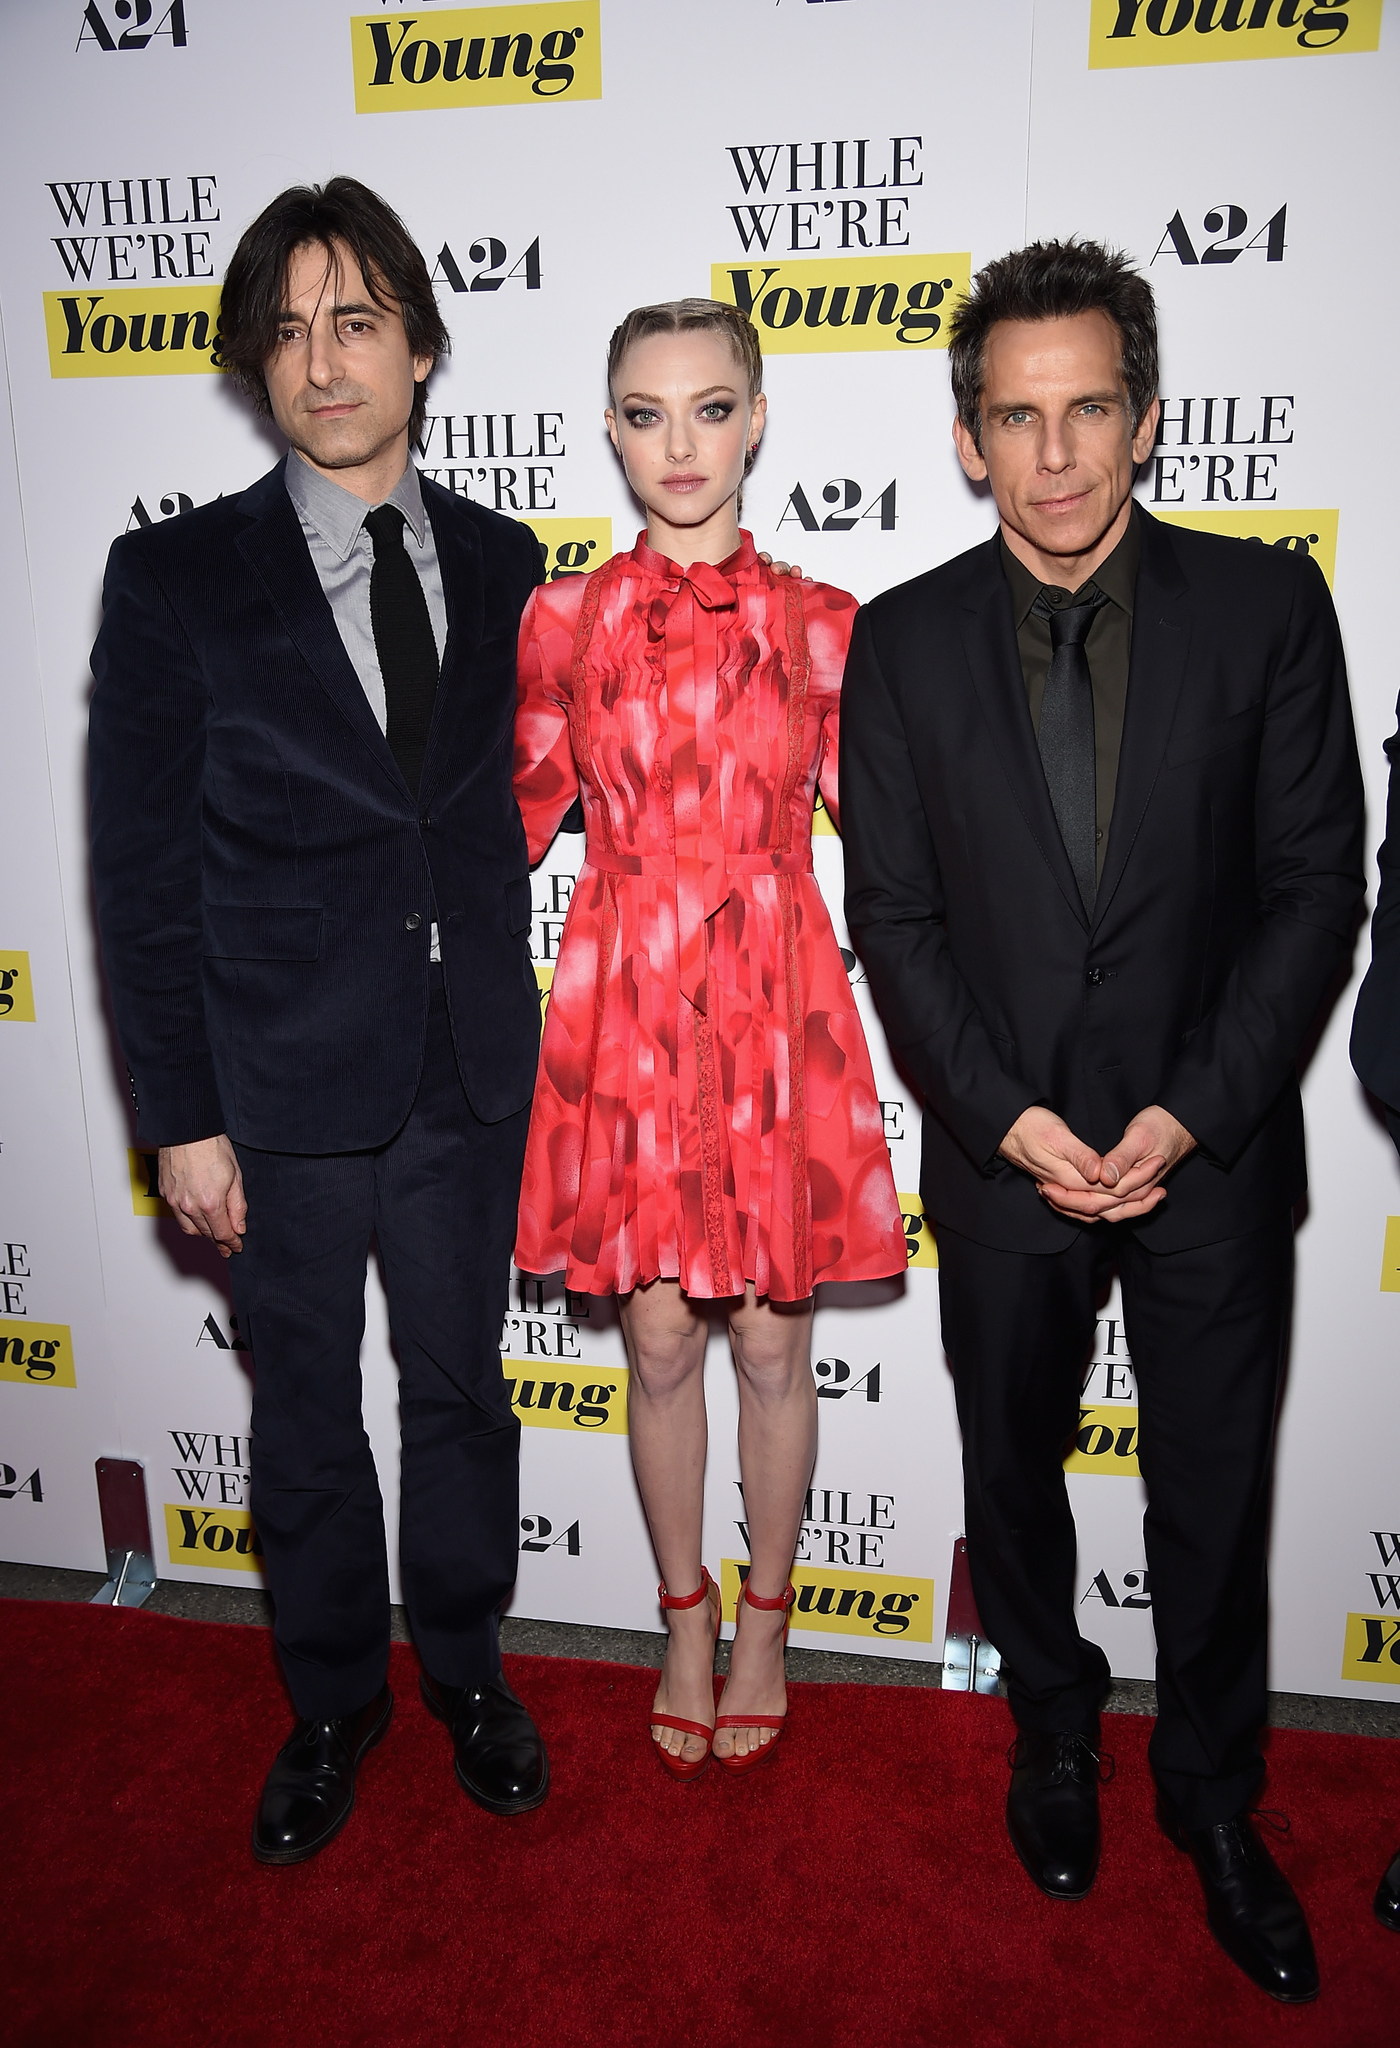 Noah Baumbach, Ben Stiller and Amanda Seyfried at event of While We're Young (2014)